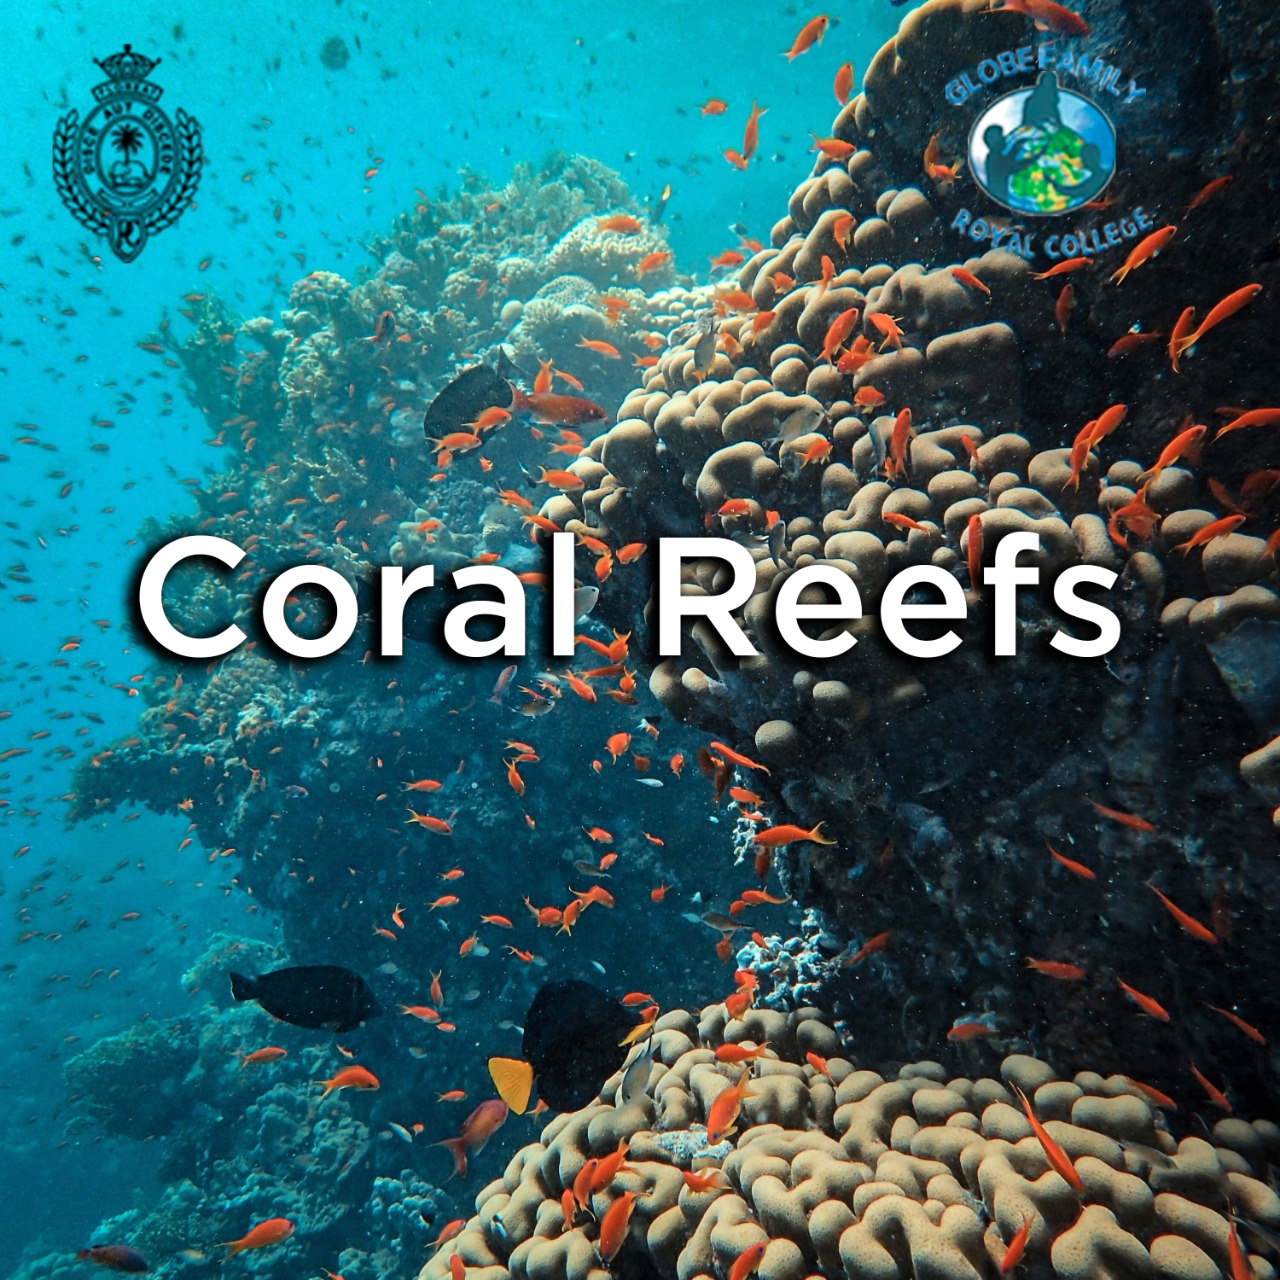 Coral Reefs - The Royal College